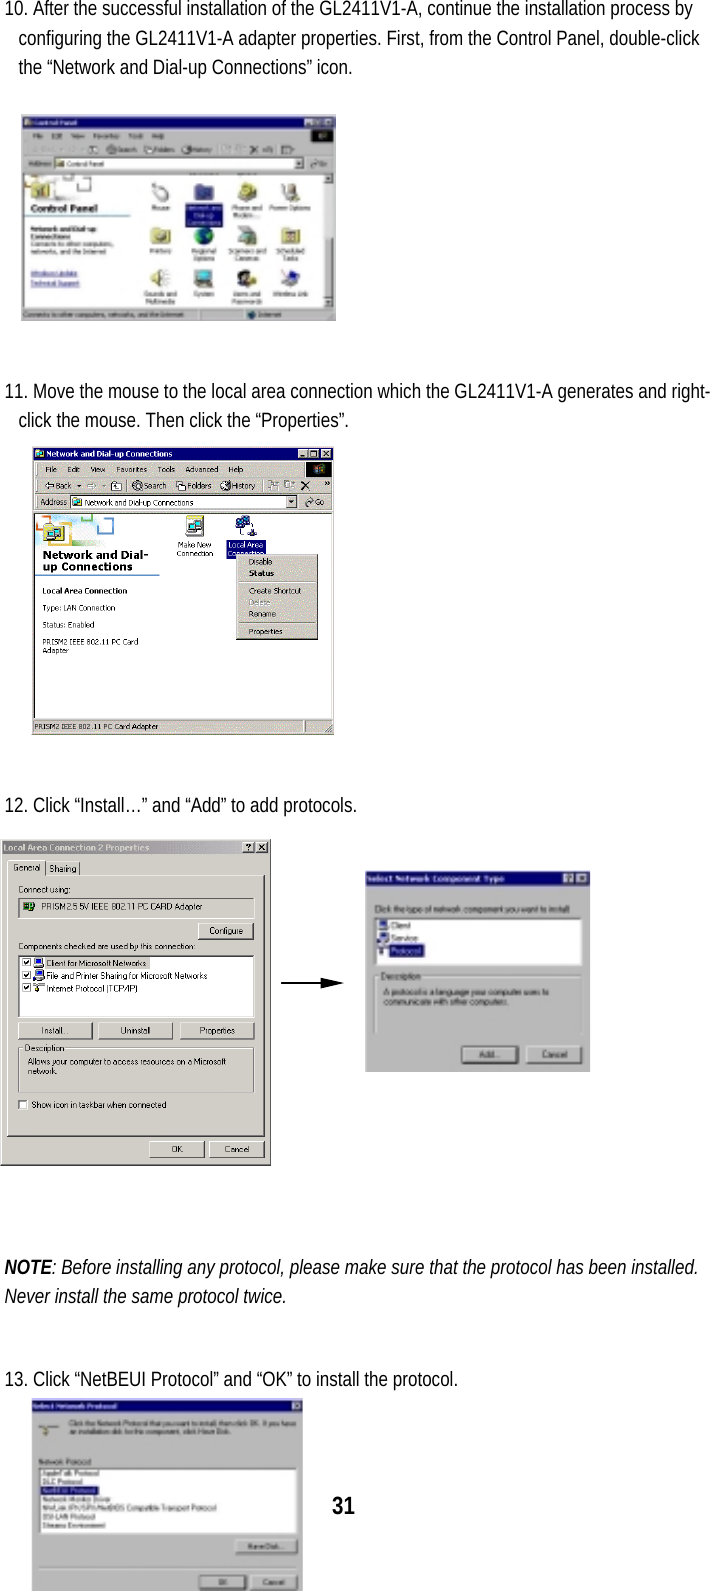  31 10. After the successful installation of the GL2411V1-A, continue the installation process by configuring the GL2411V1-A adapter properties. First, from the Control Panel, double-click the “Network and Dial-up Connections” icon.  11. Move the mouse to the local area connection which the GL2411V1-A generates and right-click the mouse. Then click the “Properties”.  12. Click “Install…” and “Add” to add protocols.         NOTE: Before installing any protocol, please make sure that the protocol has been installed. Never install the same protocol twice.  13. Click “NetBEUI Protocol” and “OK” to install the protocol. 